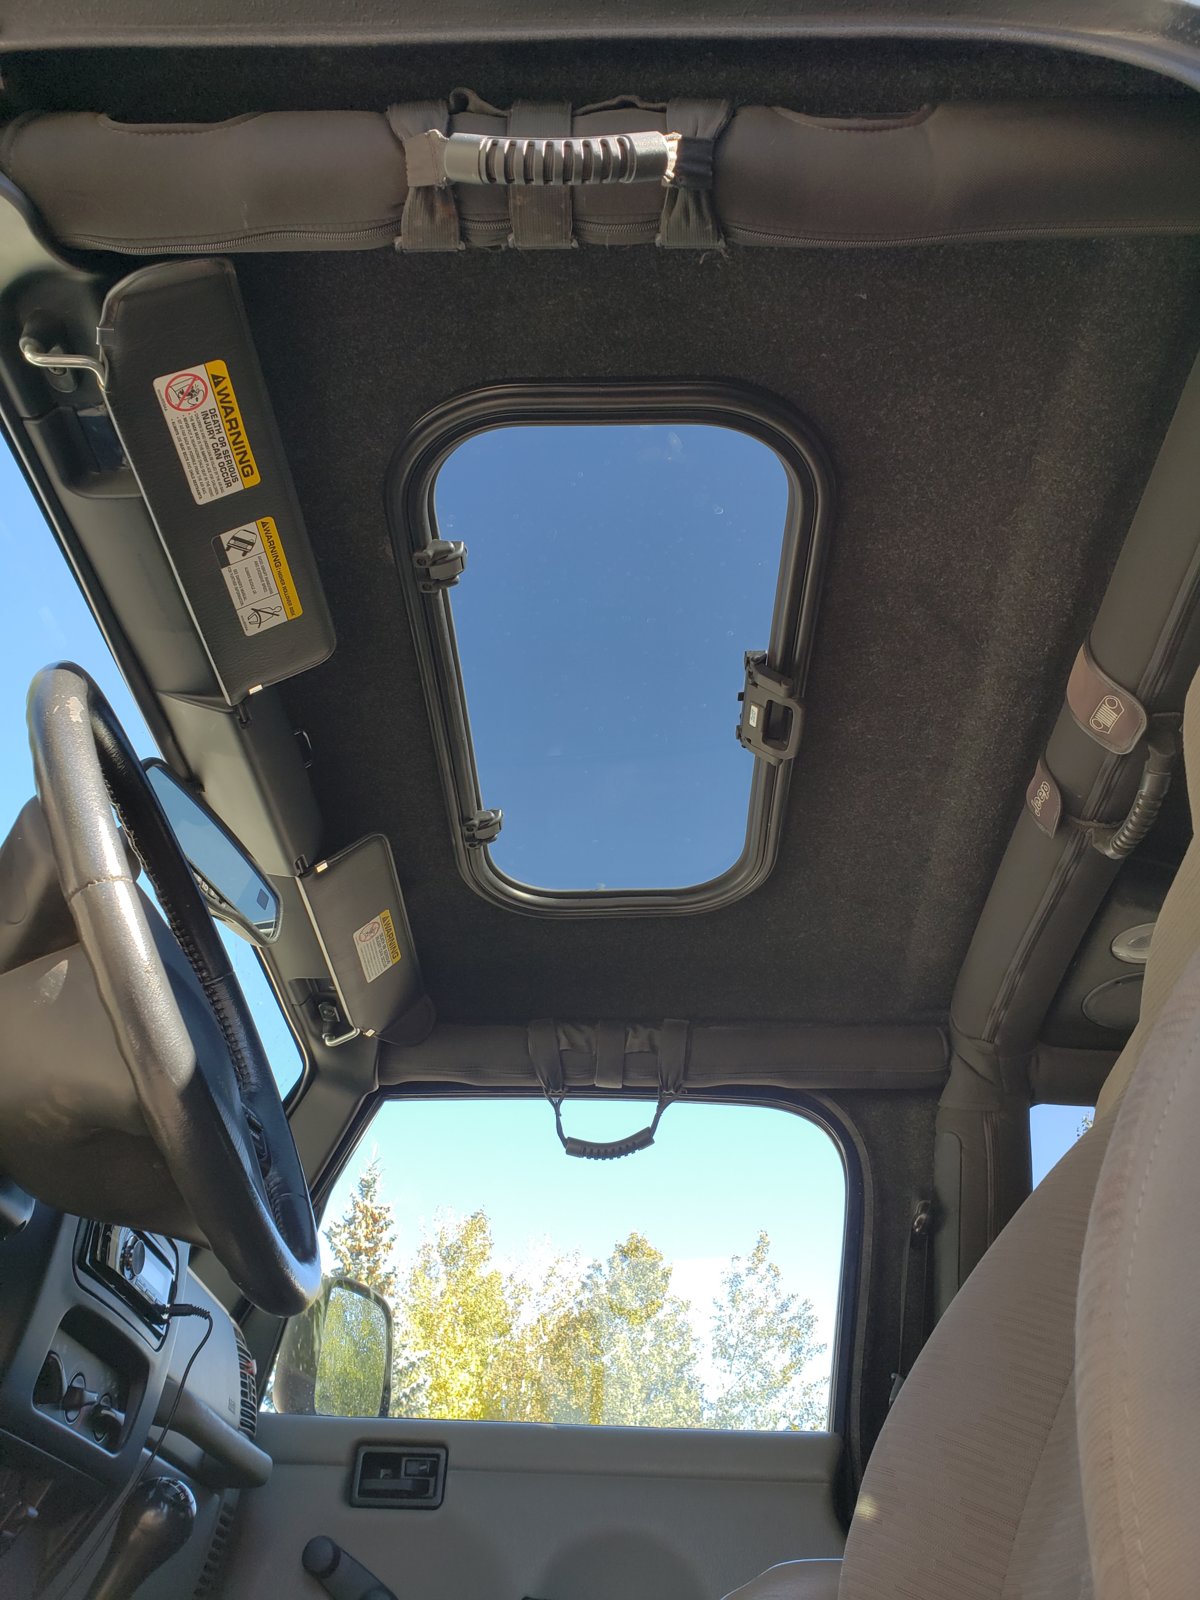 Sunroof in hardtop | Page 2 | Jeep Wrangler TJ Forum